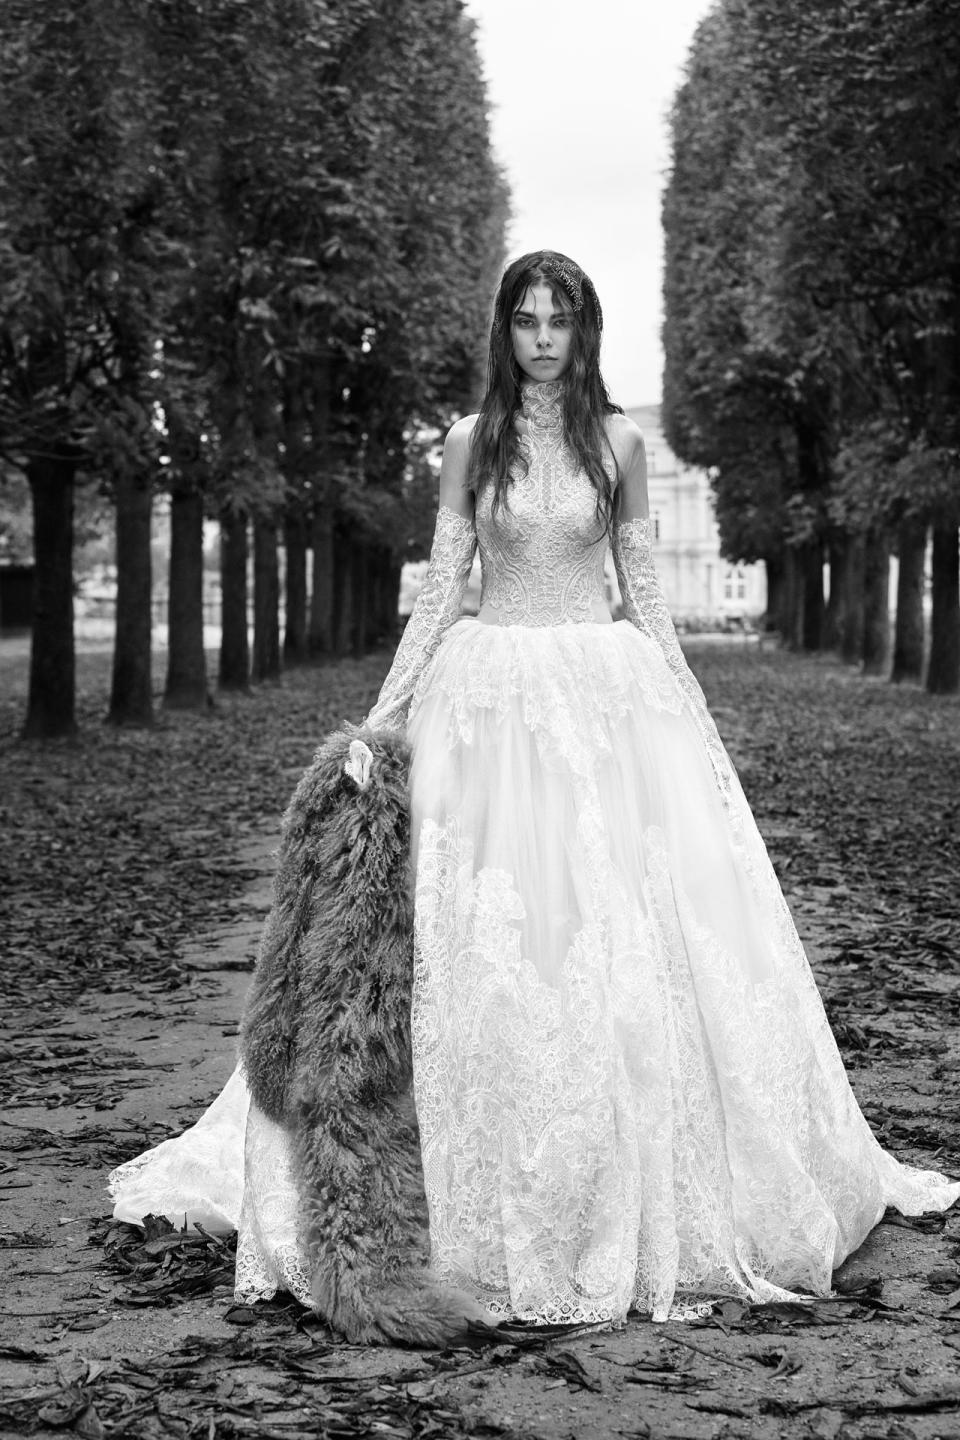 <p><i>Long-sleeve macramé lace ball gown with high neck accent and couture hand-draped skirt. (Photo: Courtesy of Vera Wang/Patrick Demarchelier) </i></p>